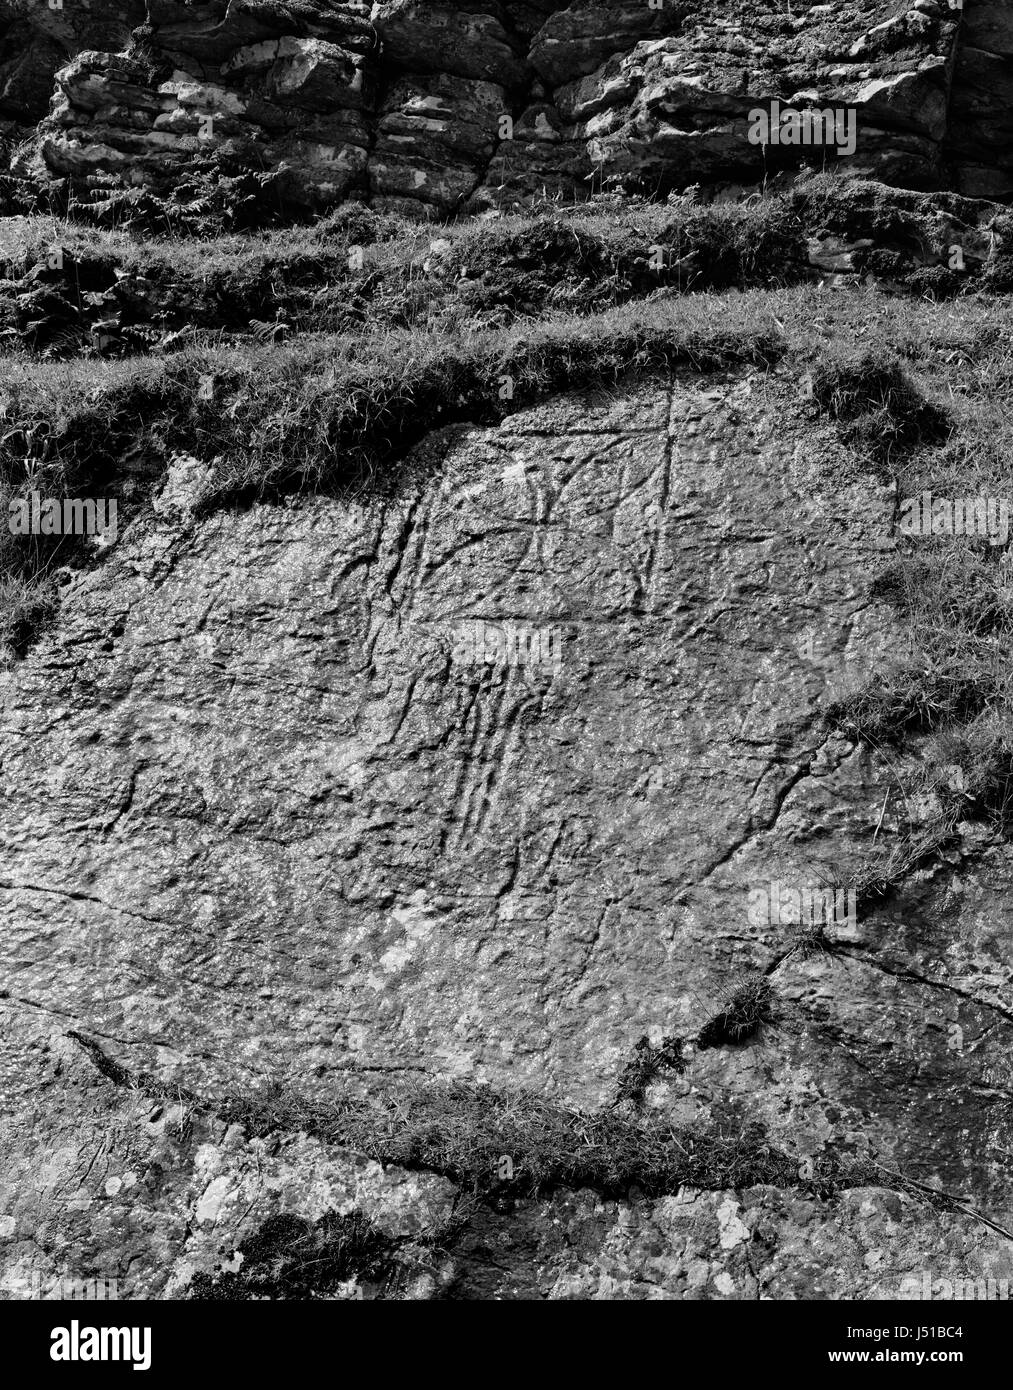 Pictish Christian symbol carved on rock face overlooking Churchton Bay, Isle of Raasay, off Skye, Scotland. Flabellum (ritual fan) & equal arm cross. Stock Photo